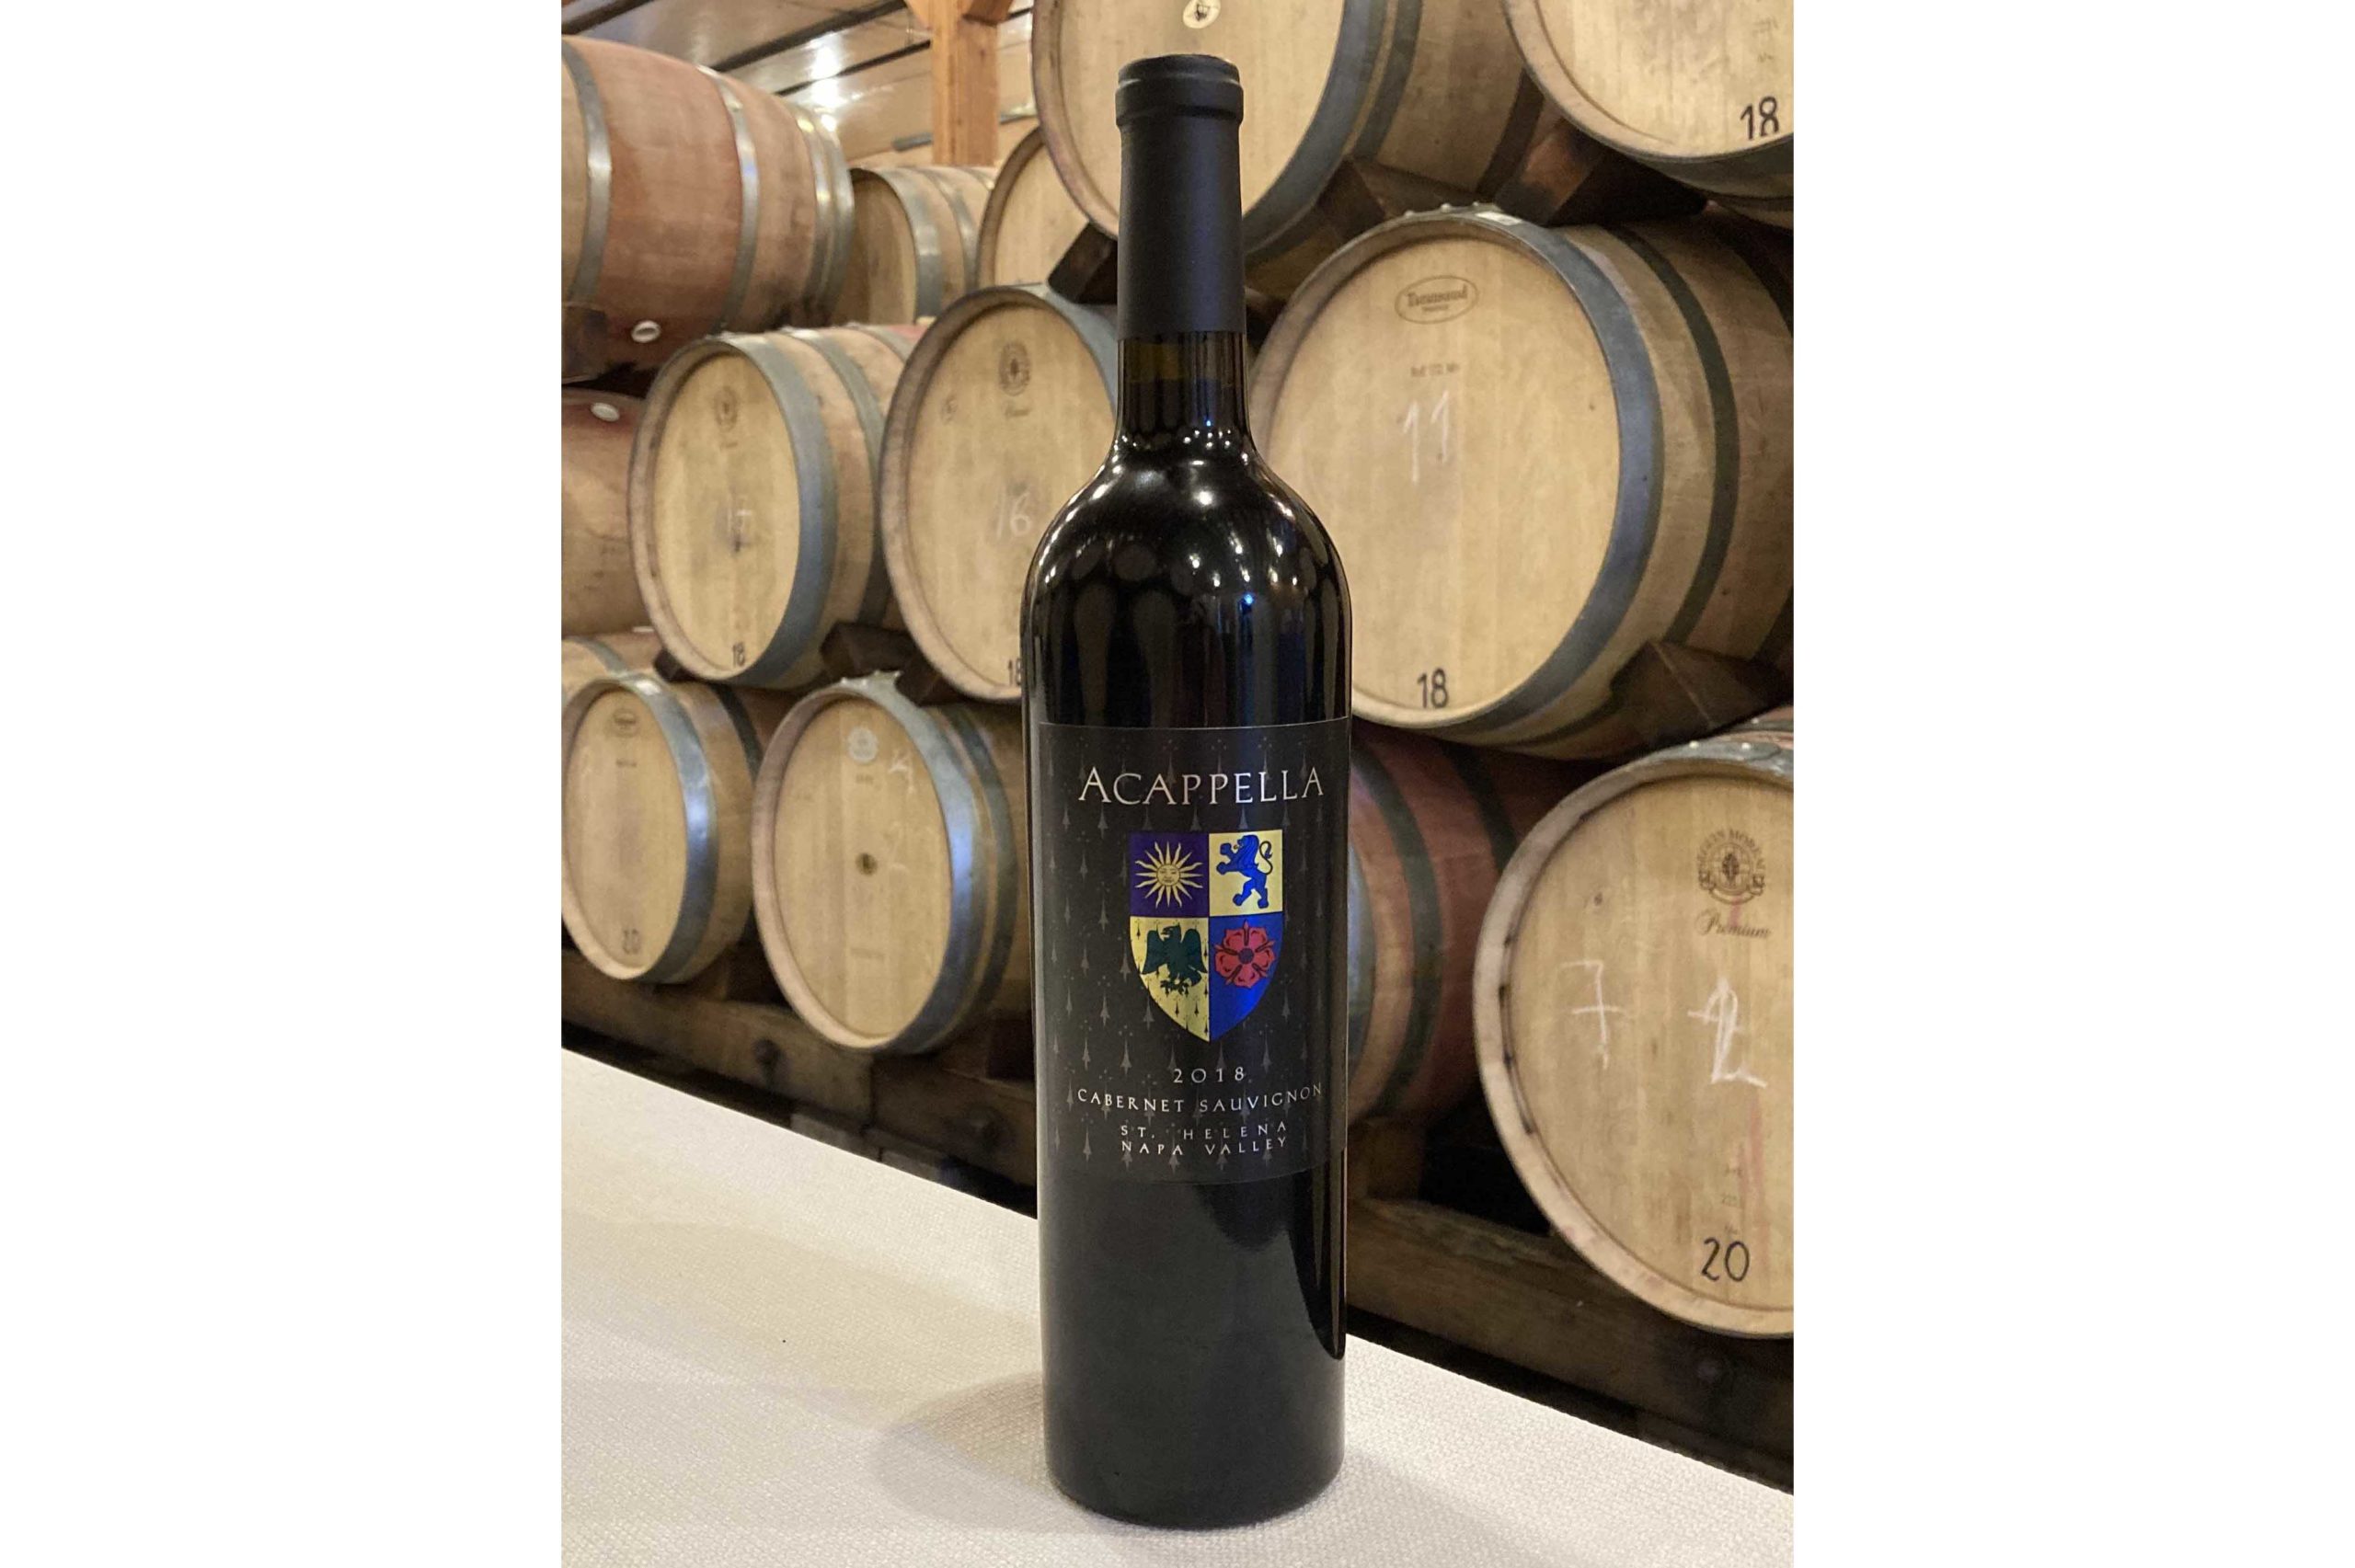 A bottle of the 2018 Acappella Cabernet Sauvignon in front of barrels in the winery